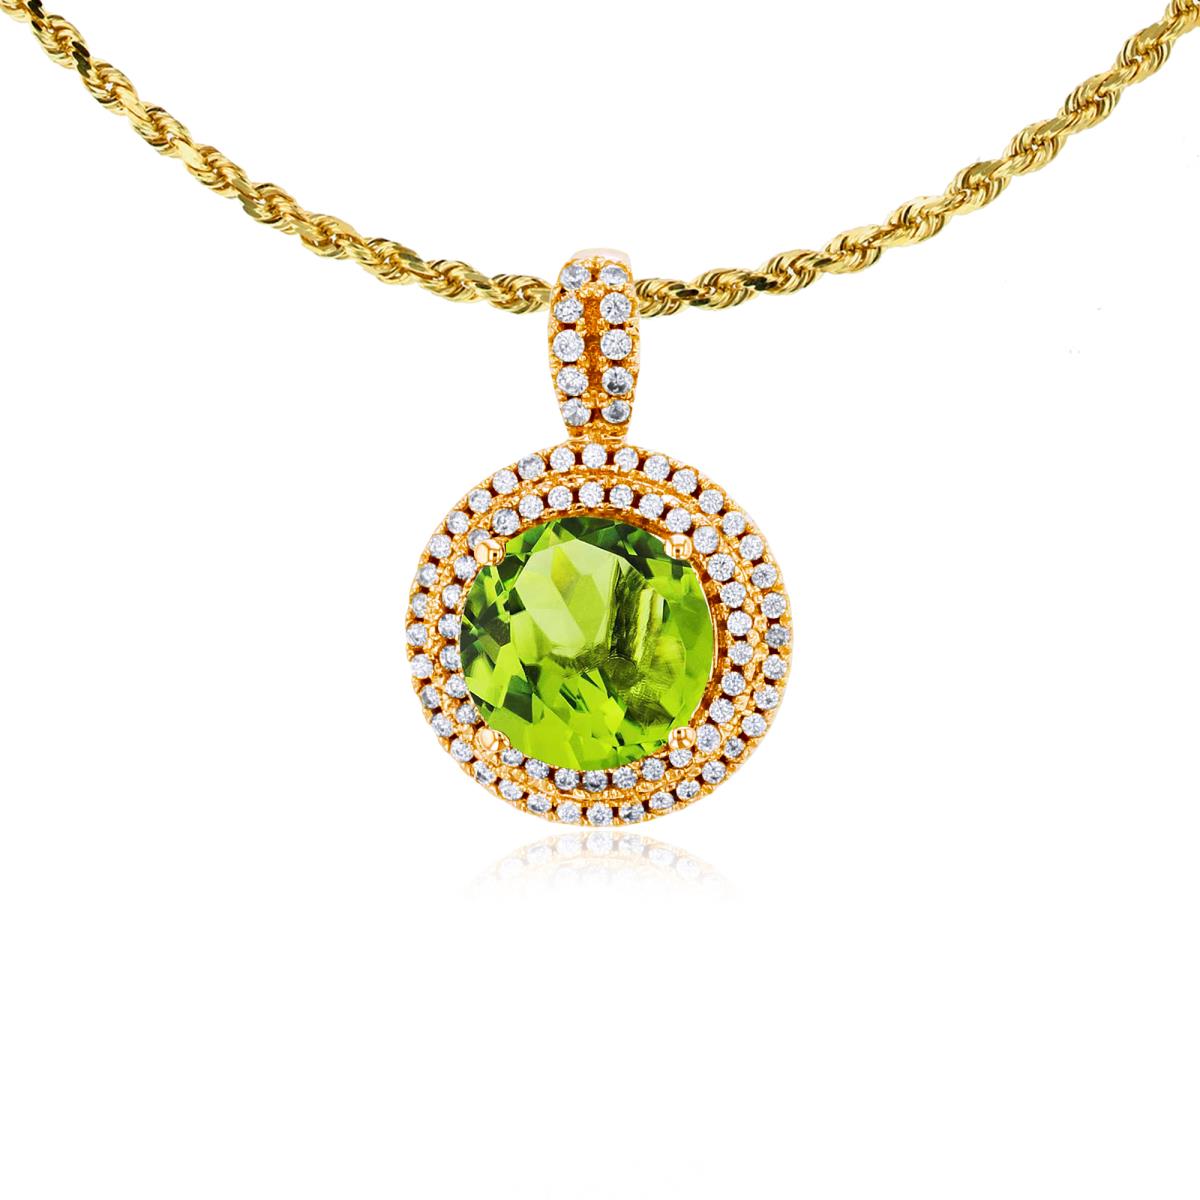 10K Yellow Gold 7mm Round Peridot & 0.25 CTTW Diamonds Double Halo 18" Rope Chain Necklace